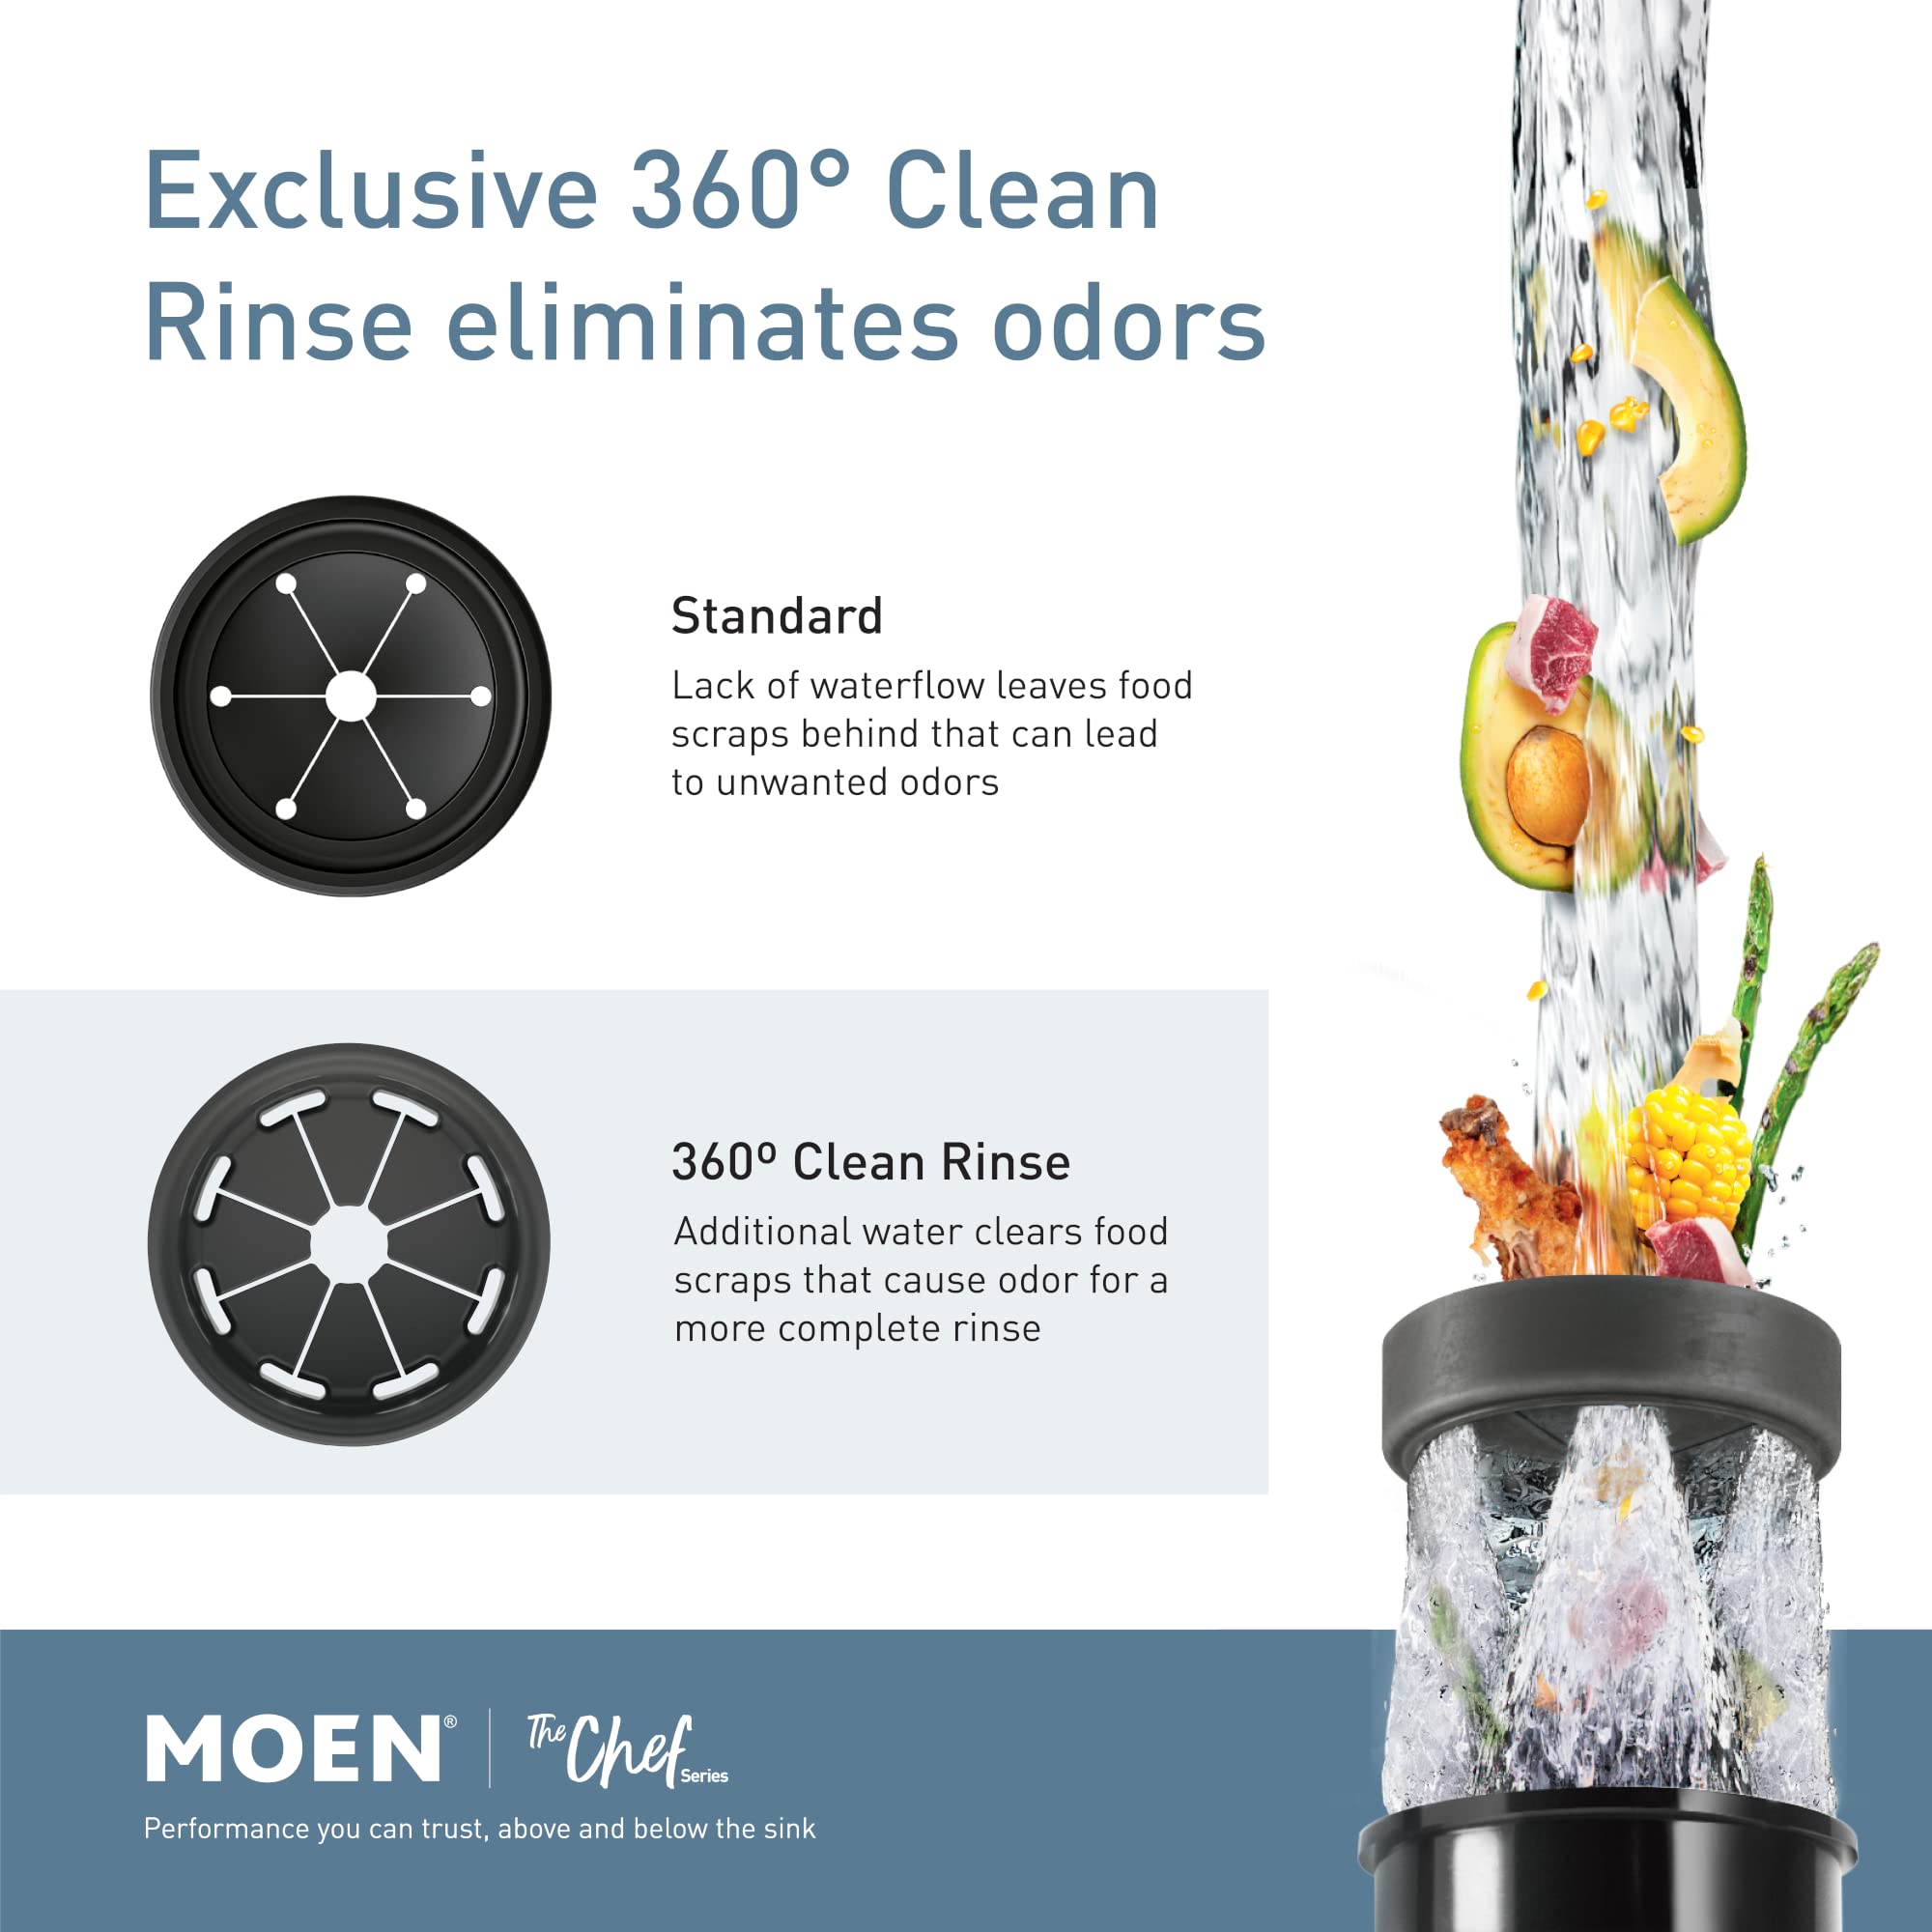 Moen GX100C Chef Series 1 HP Continuous Feed Garbage Disposal with Sound Reduction, Disposer Power Cord Included